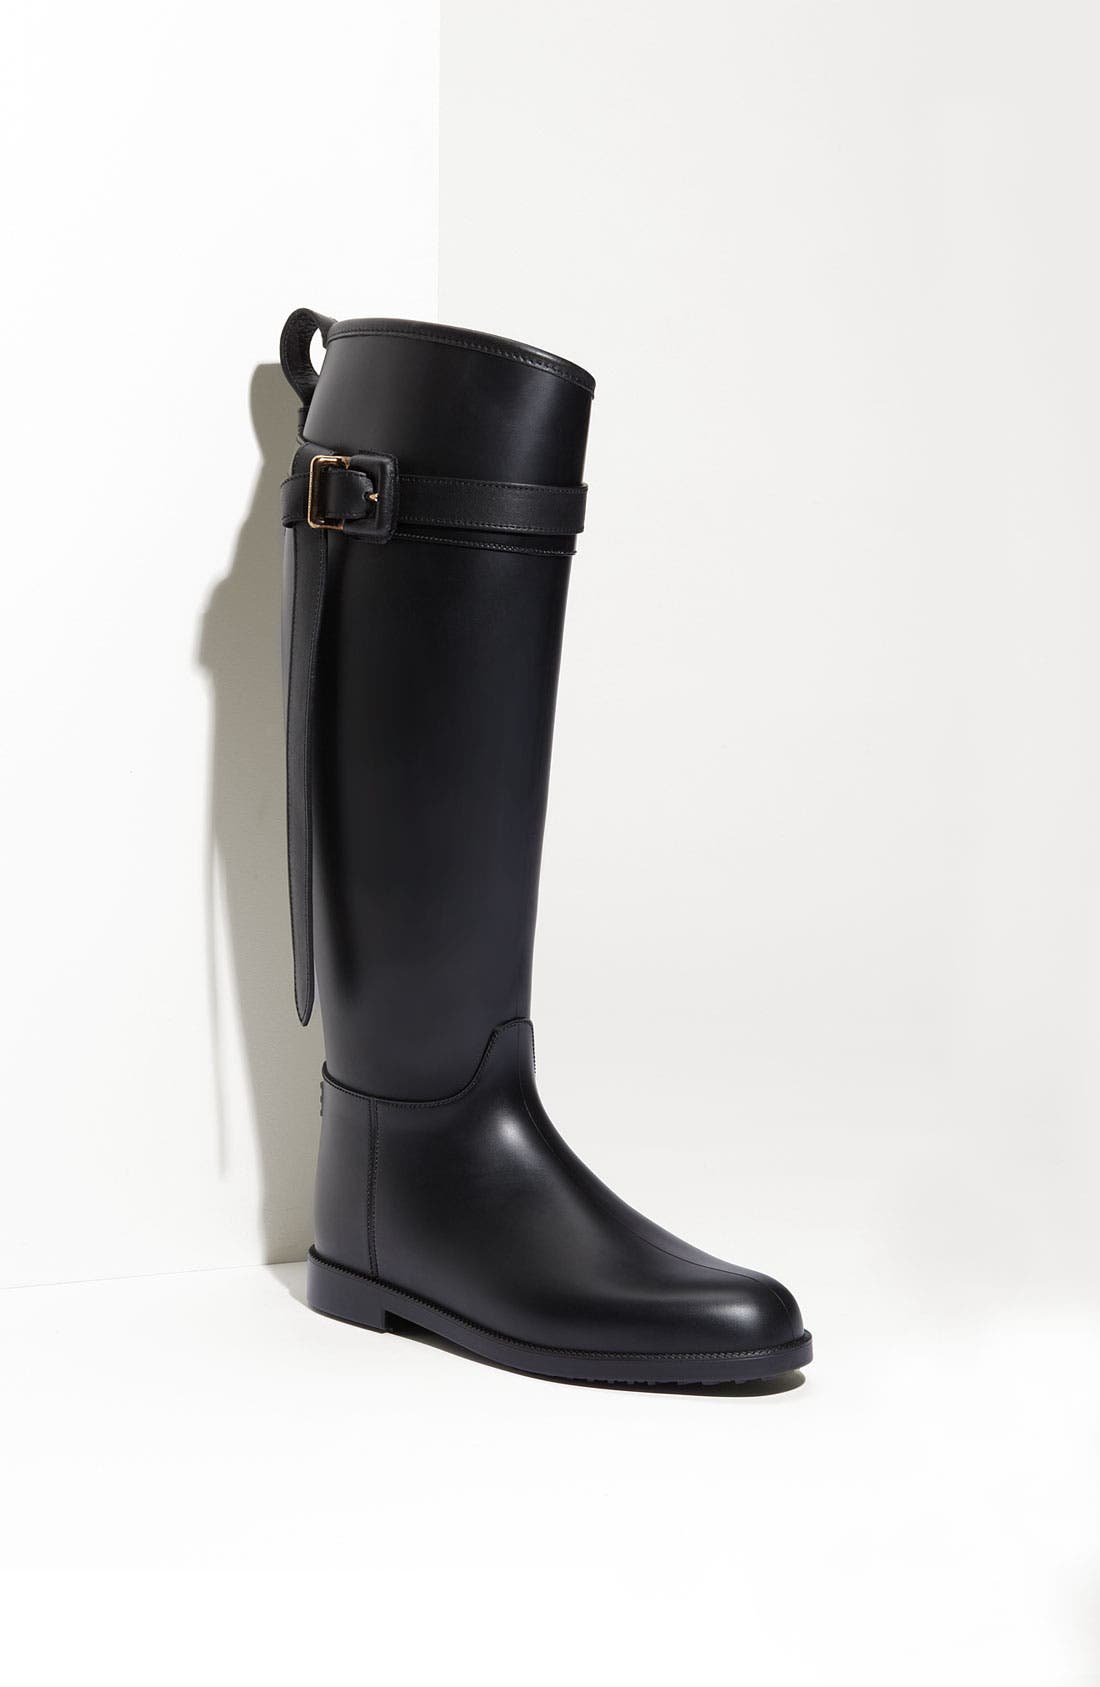 burberry rubber riding boot